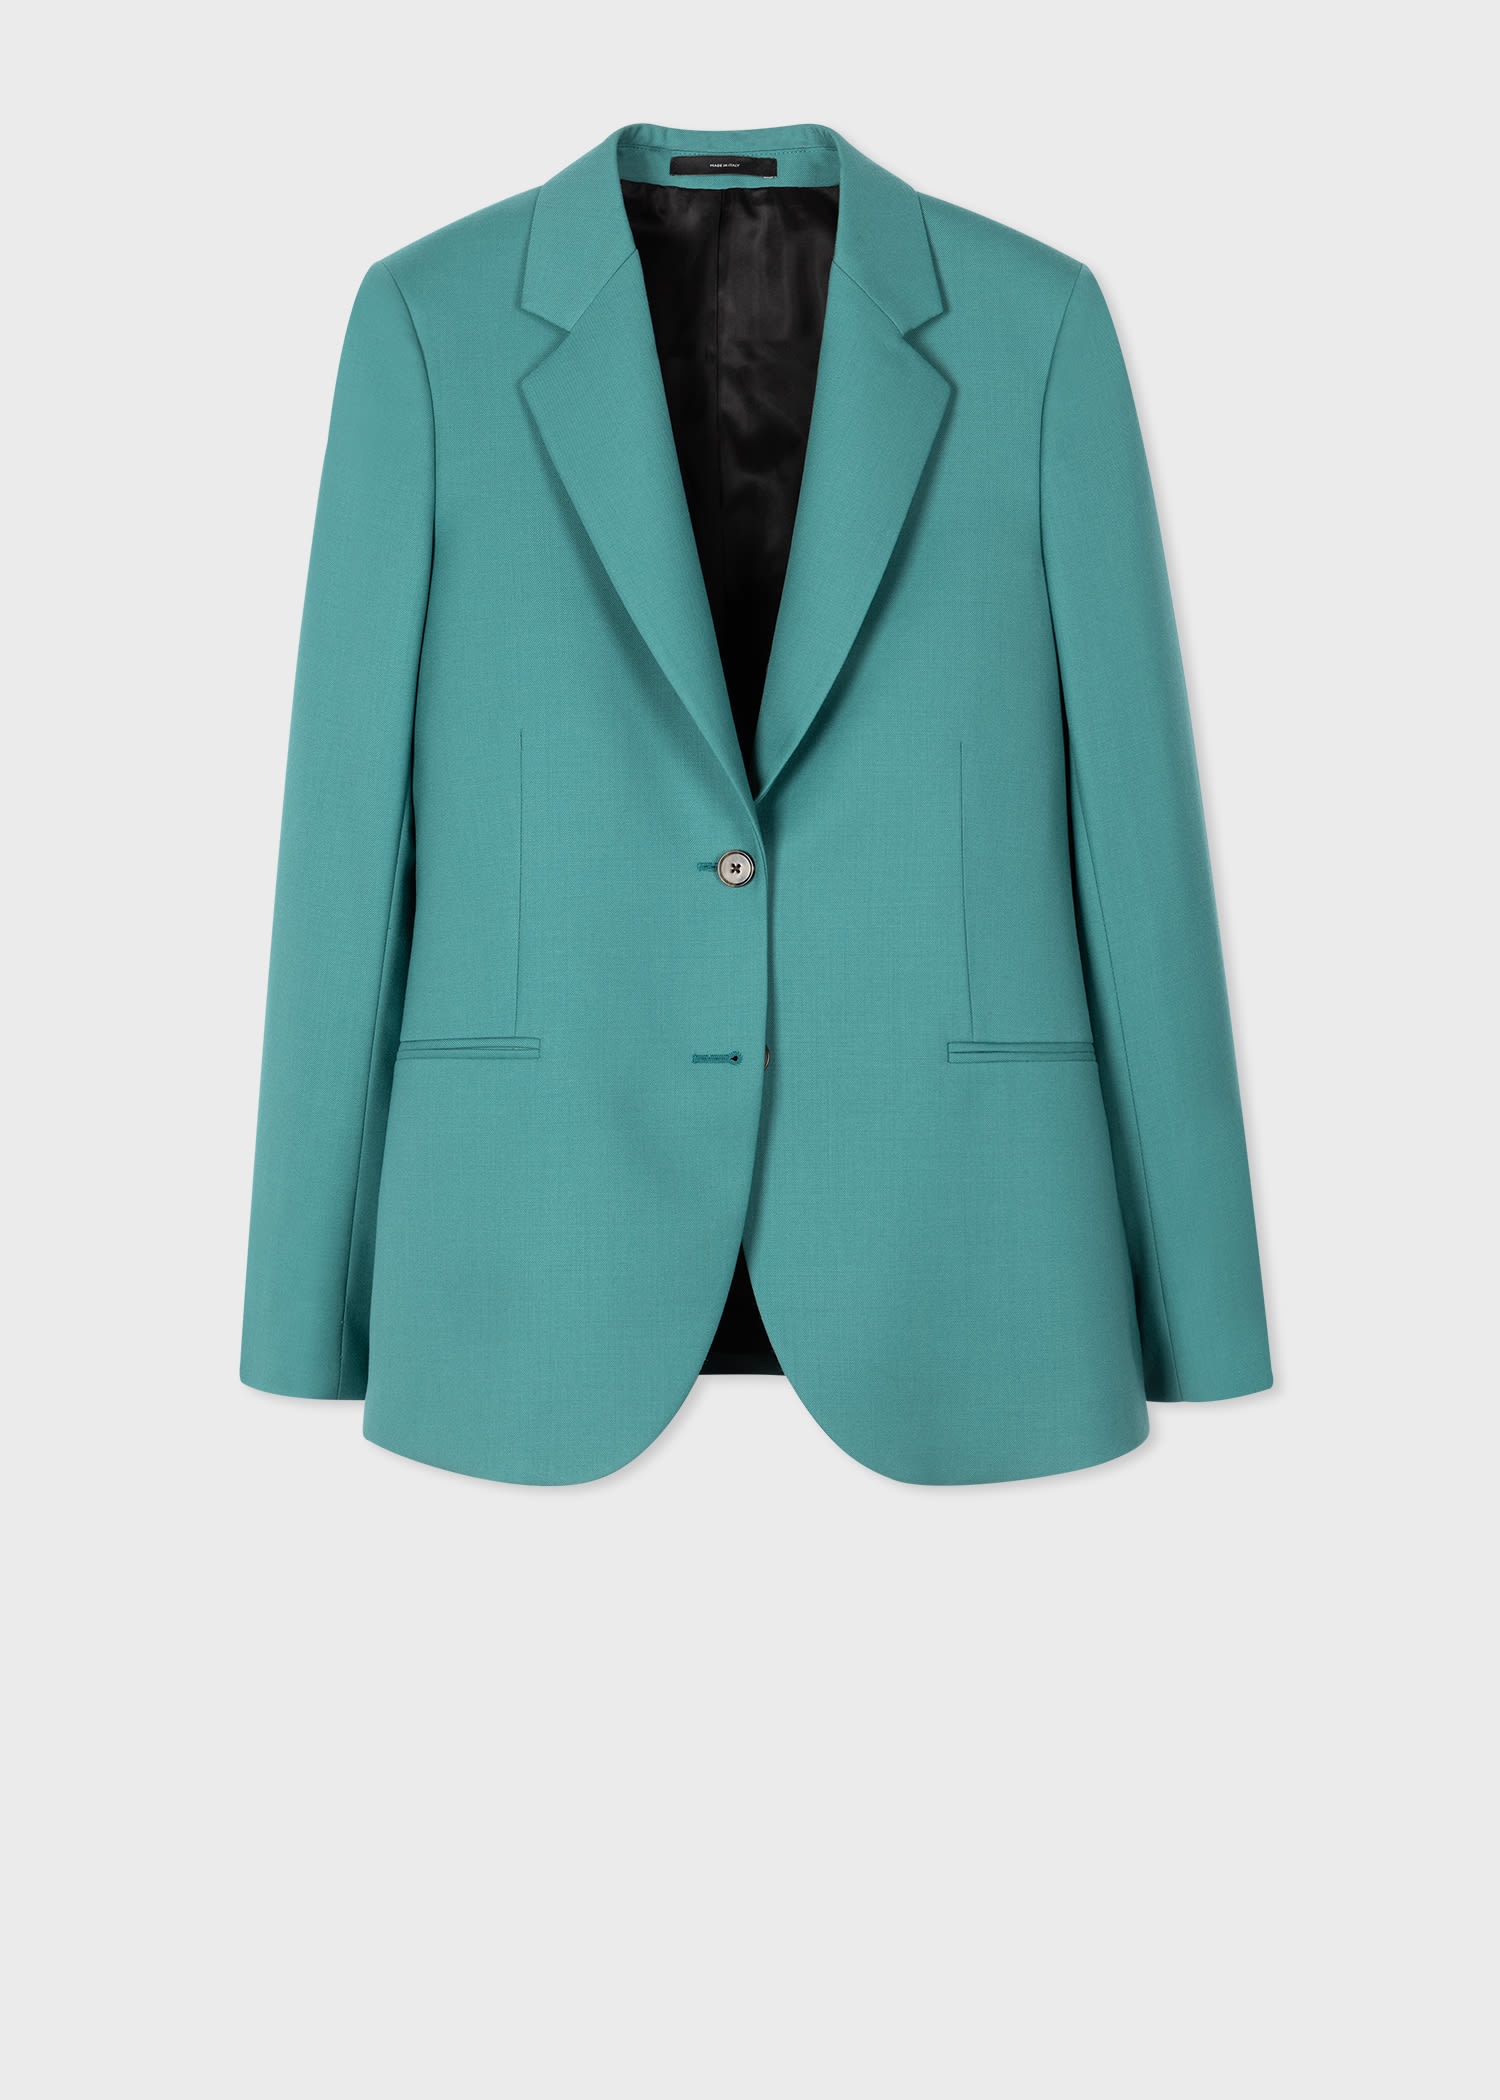 A Suit To Travel In - Wool Two-Button Blazer - 1